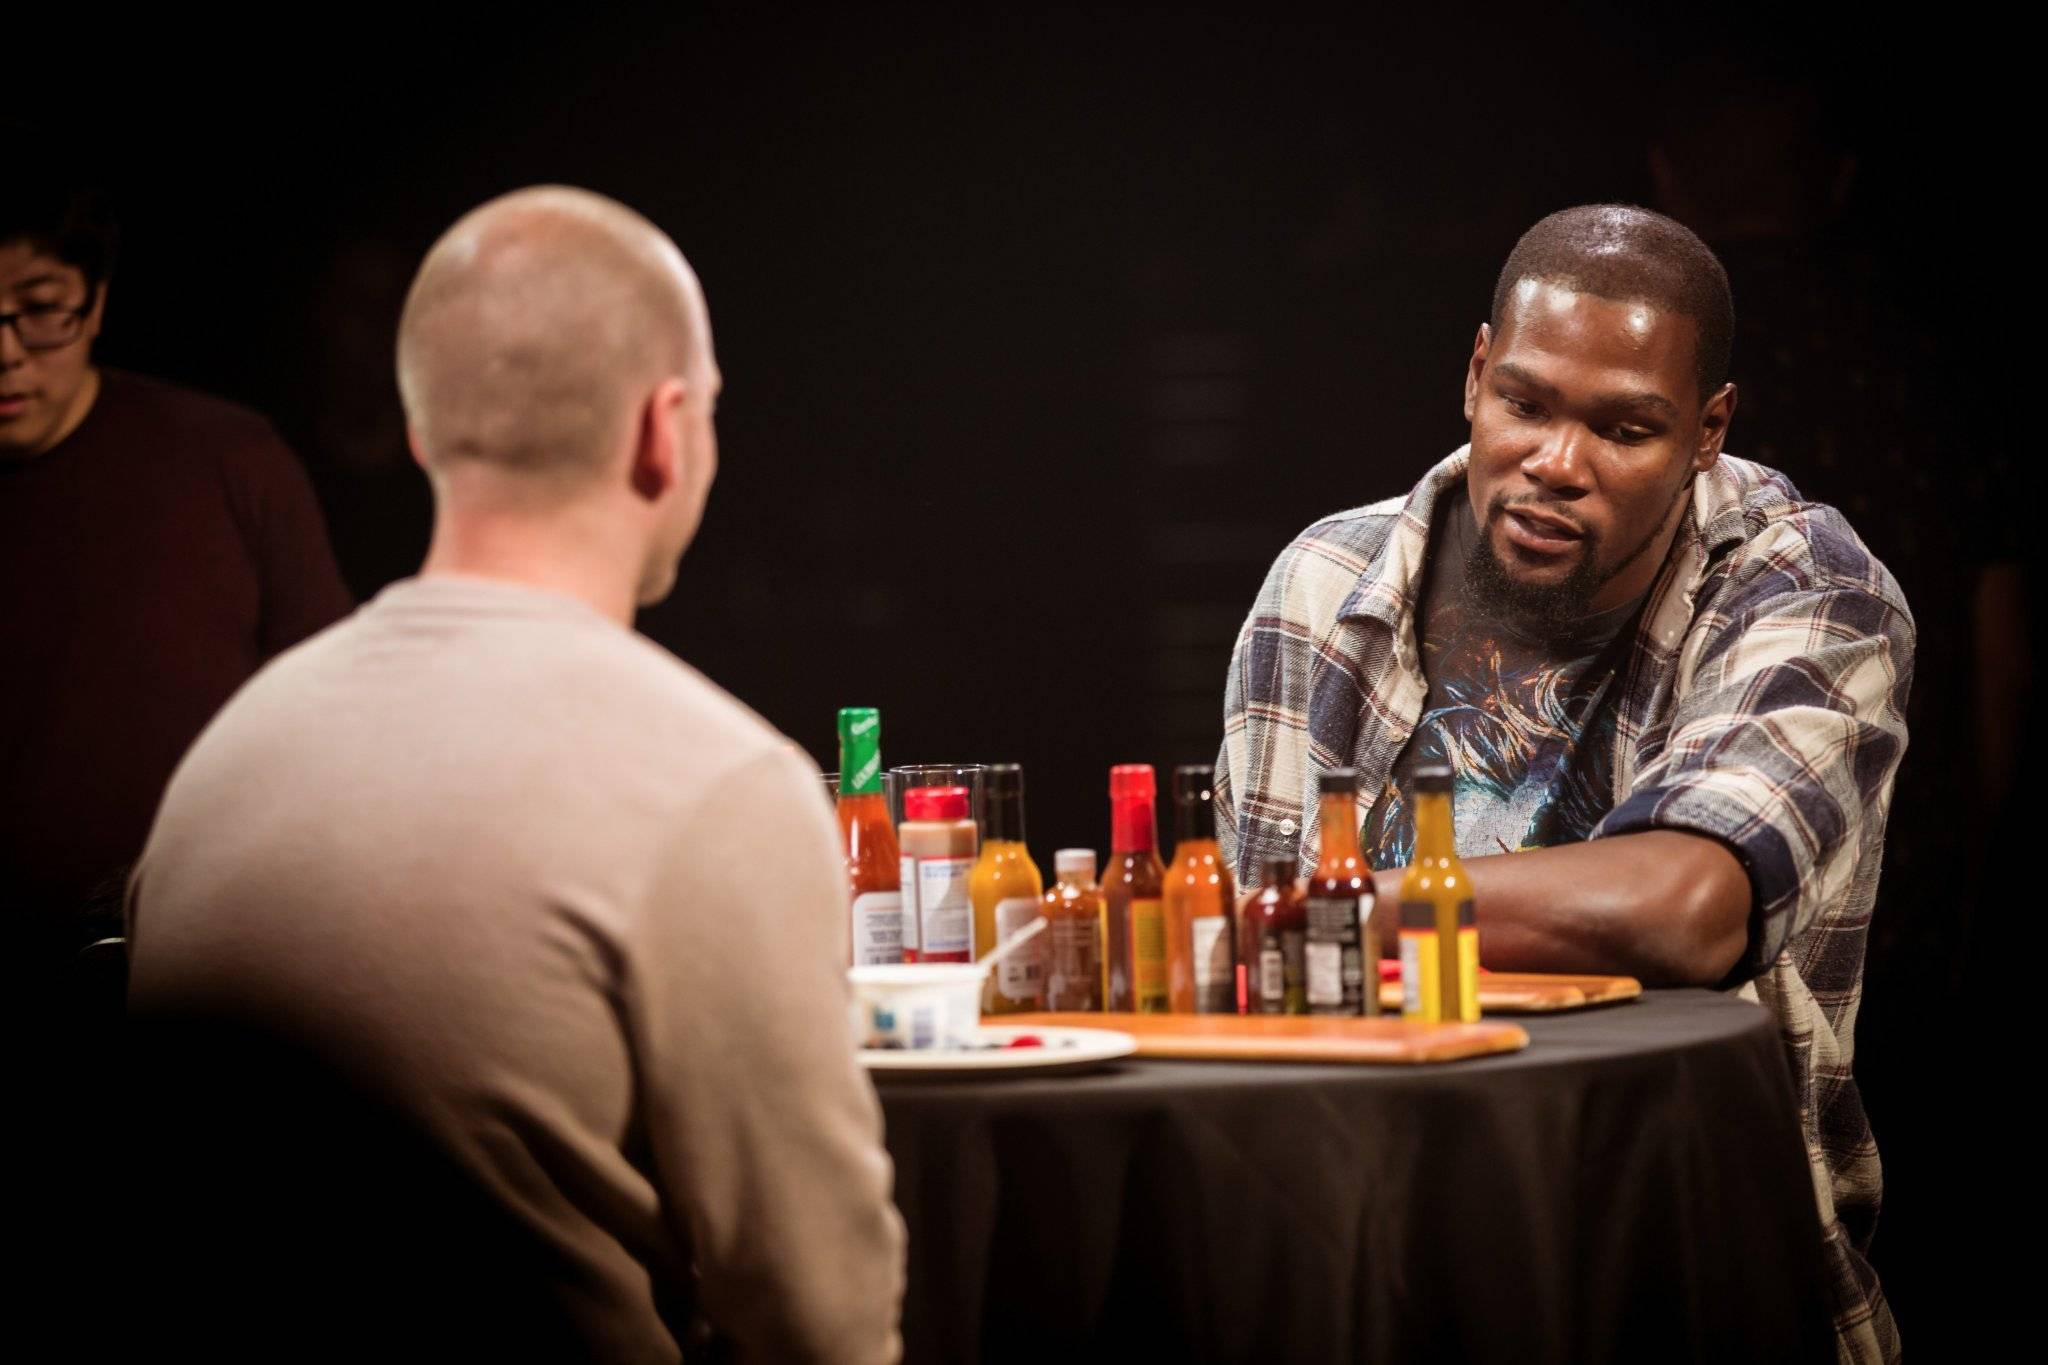 Hot Ones: a chilli-chicken-fuelled celebrity chat show